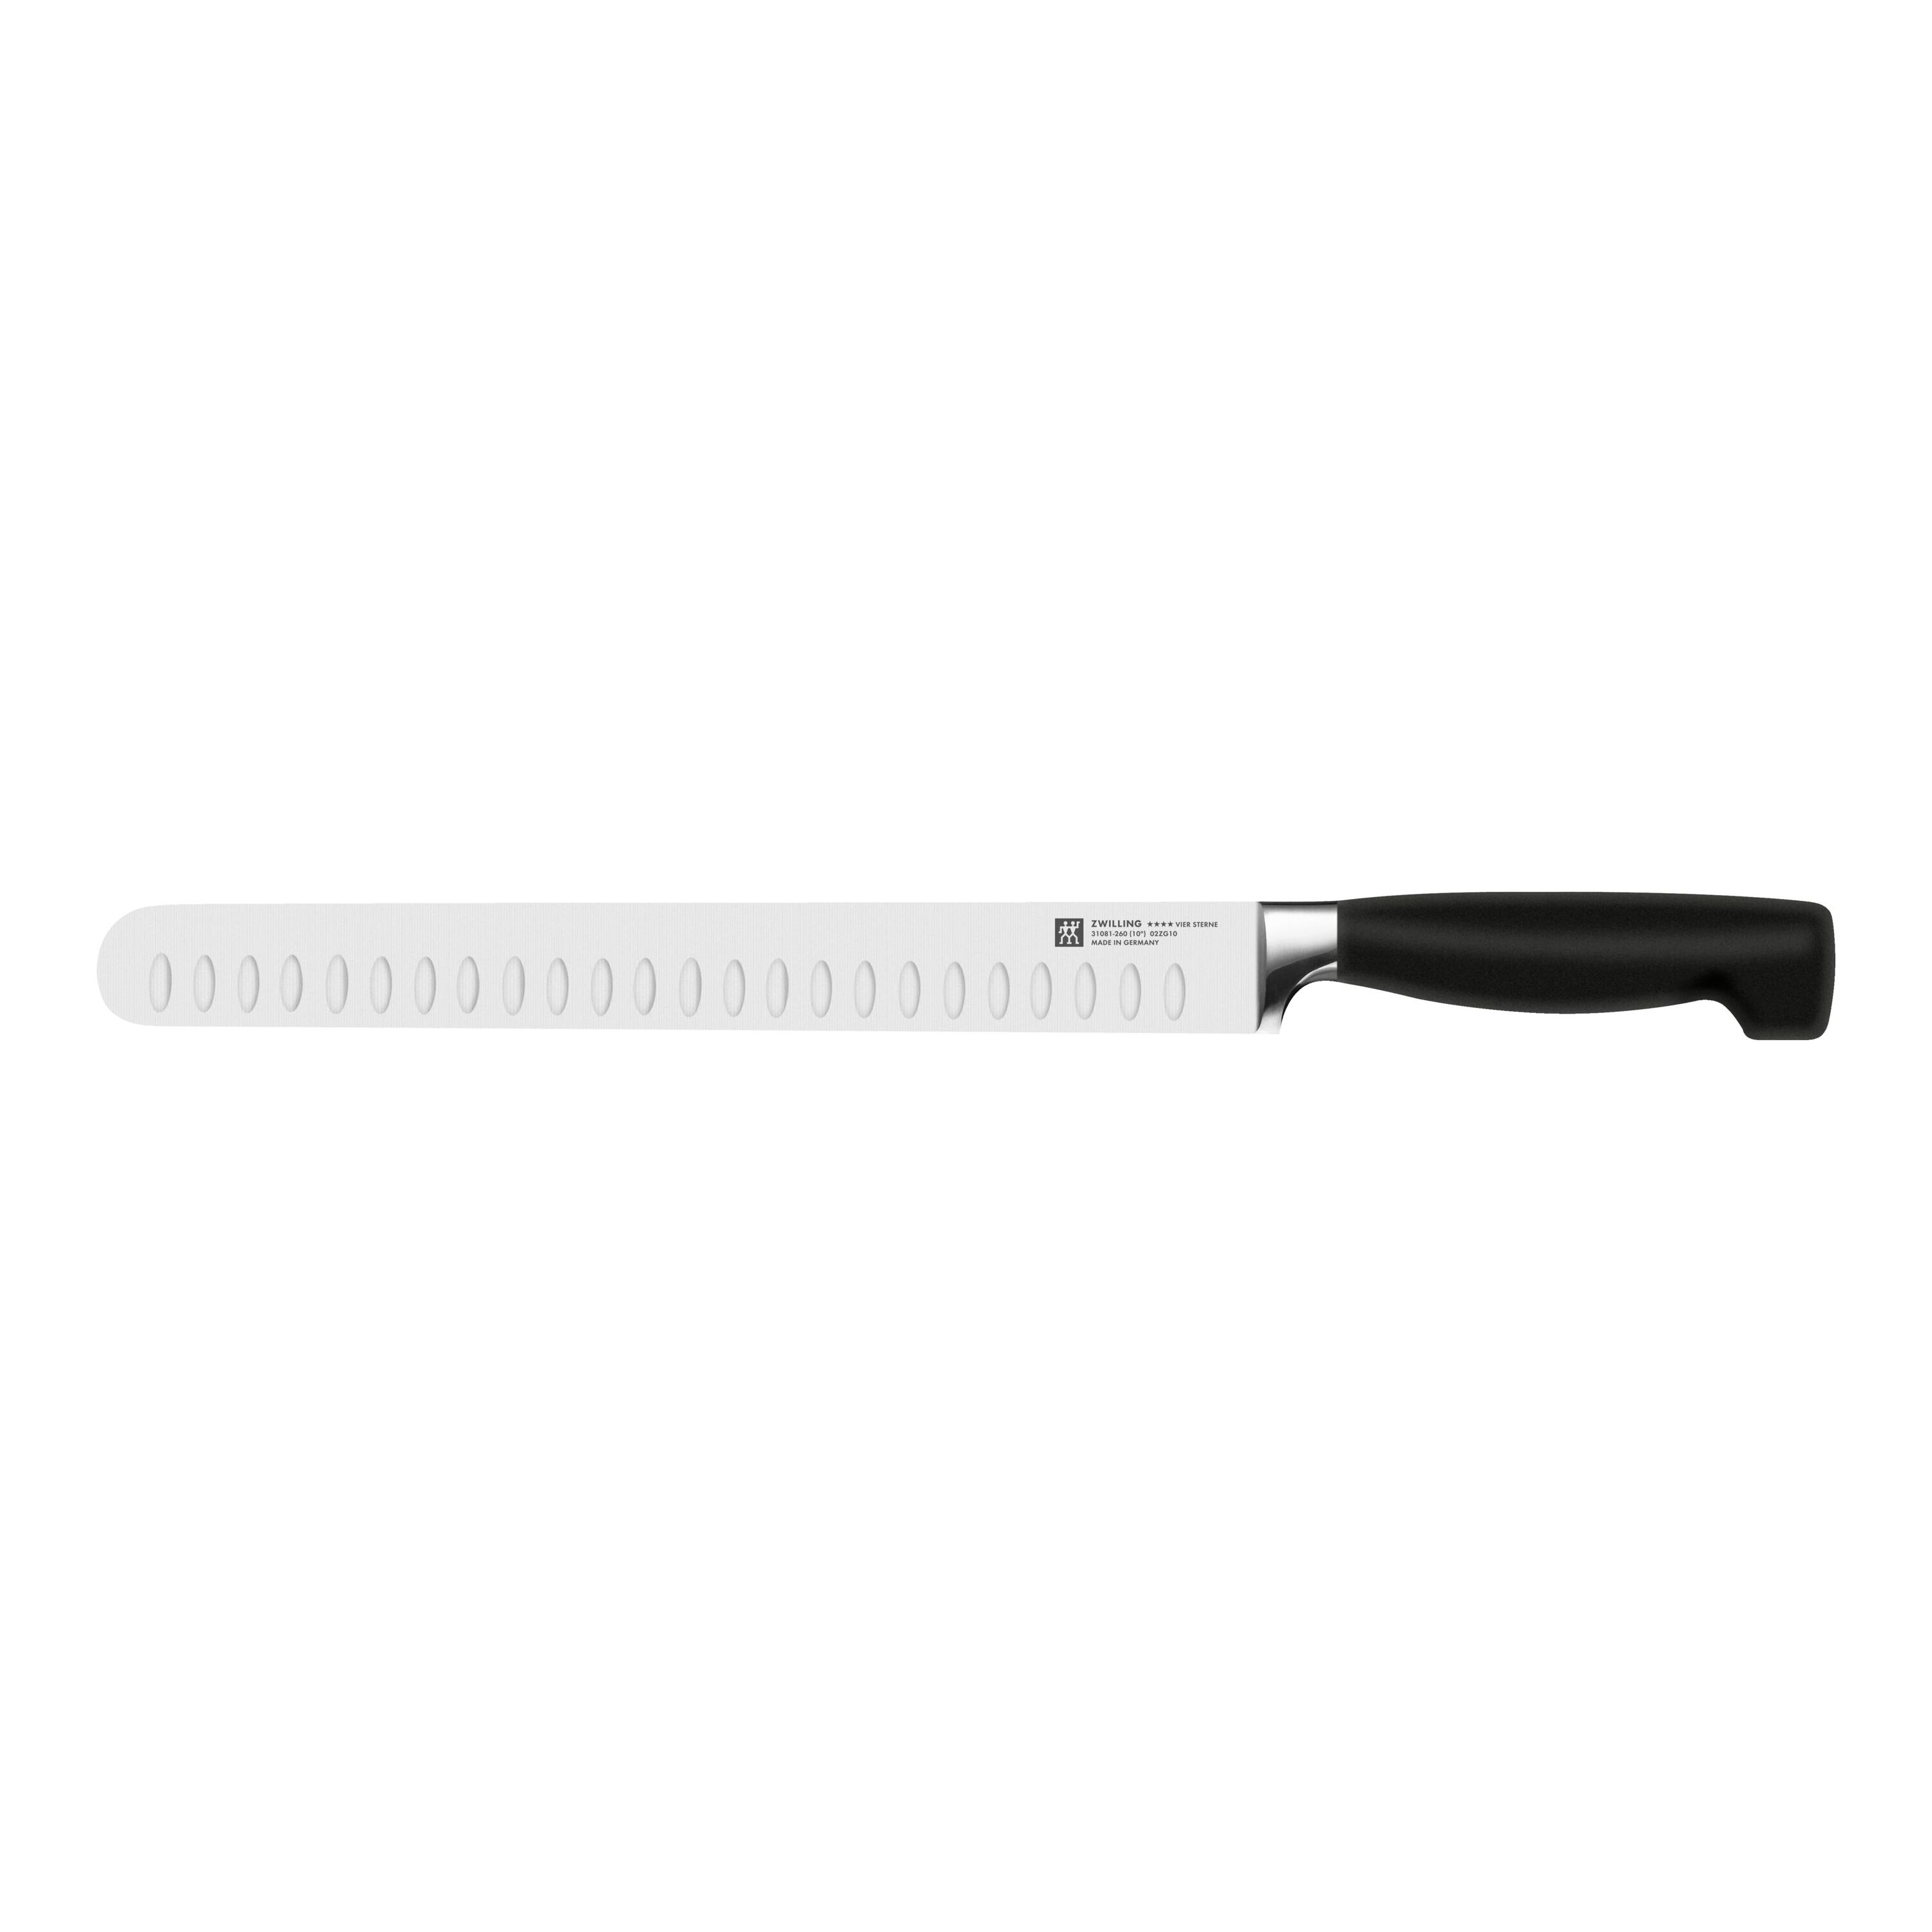 ZWILLING 10-inch Sharpening Steel with Stainless Steel End Cap, 10